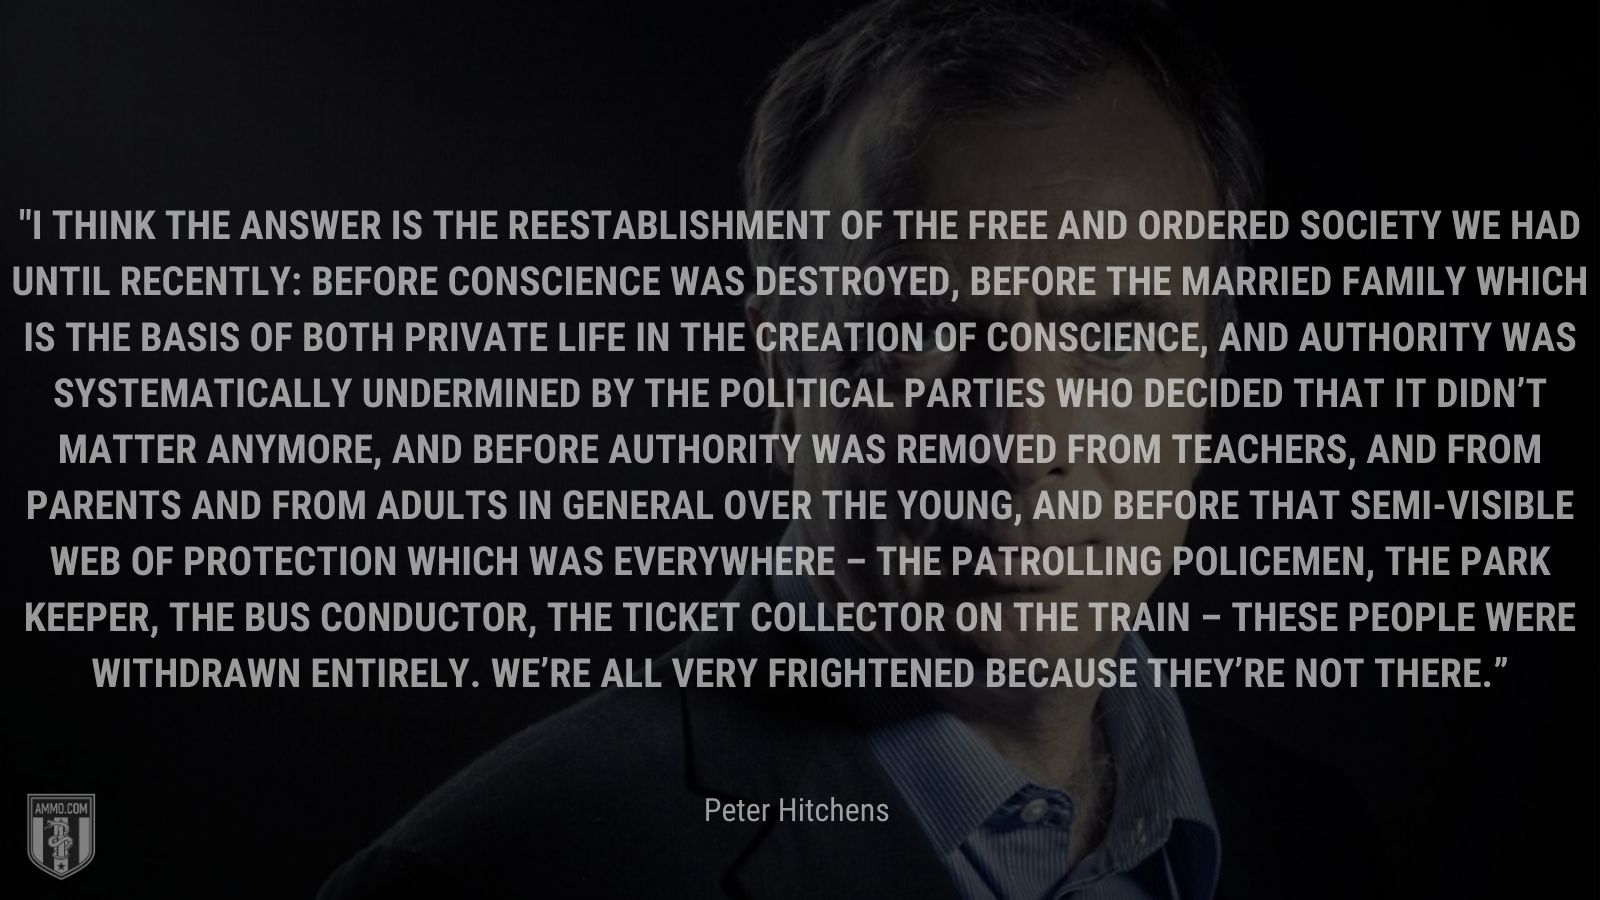 “I think the answer is the reestablishment of the free and ordered society we had until recently: Before conscience was destroyed, before the married family which is the basis of both private life in the creation of conscience, and authority was systematically undermined by the political parties who decided that it didn’t matter anymore, and before authority was removed from teachers, and from parents and from adults in general over the young, and before that semi-visible web of protection which was everywhere – the patrolling policemen, the park keeper, the bus conductor, the ticket collector on the train – these people were withdrawn entirely. We’re all very frightened because they’re not there.” - Peter Hitchens